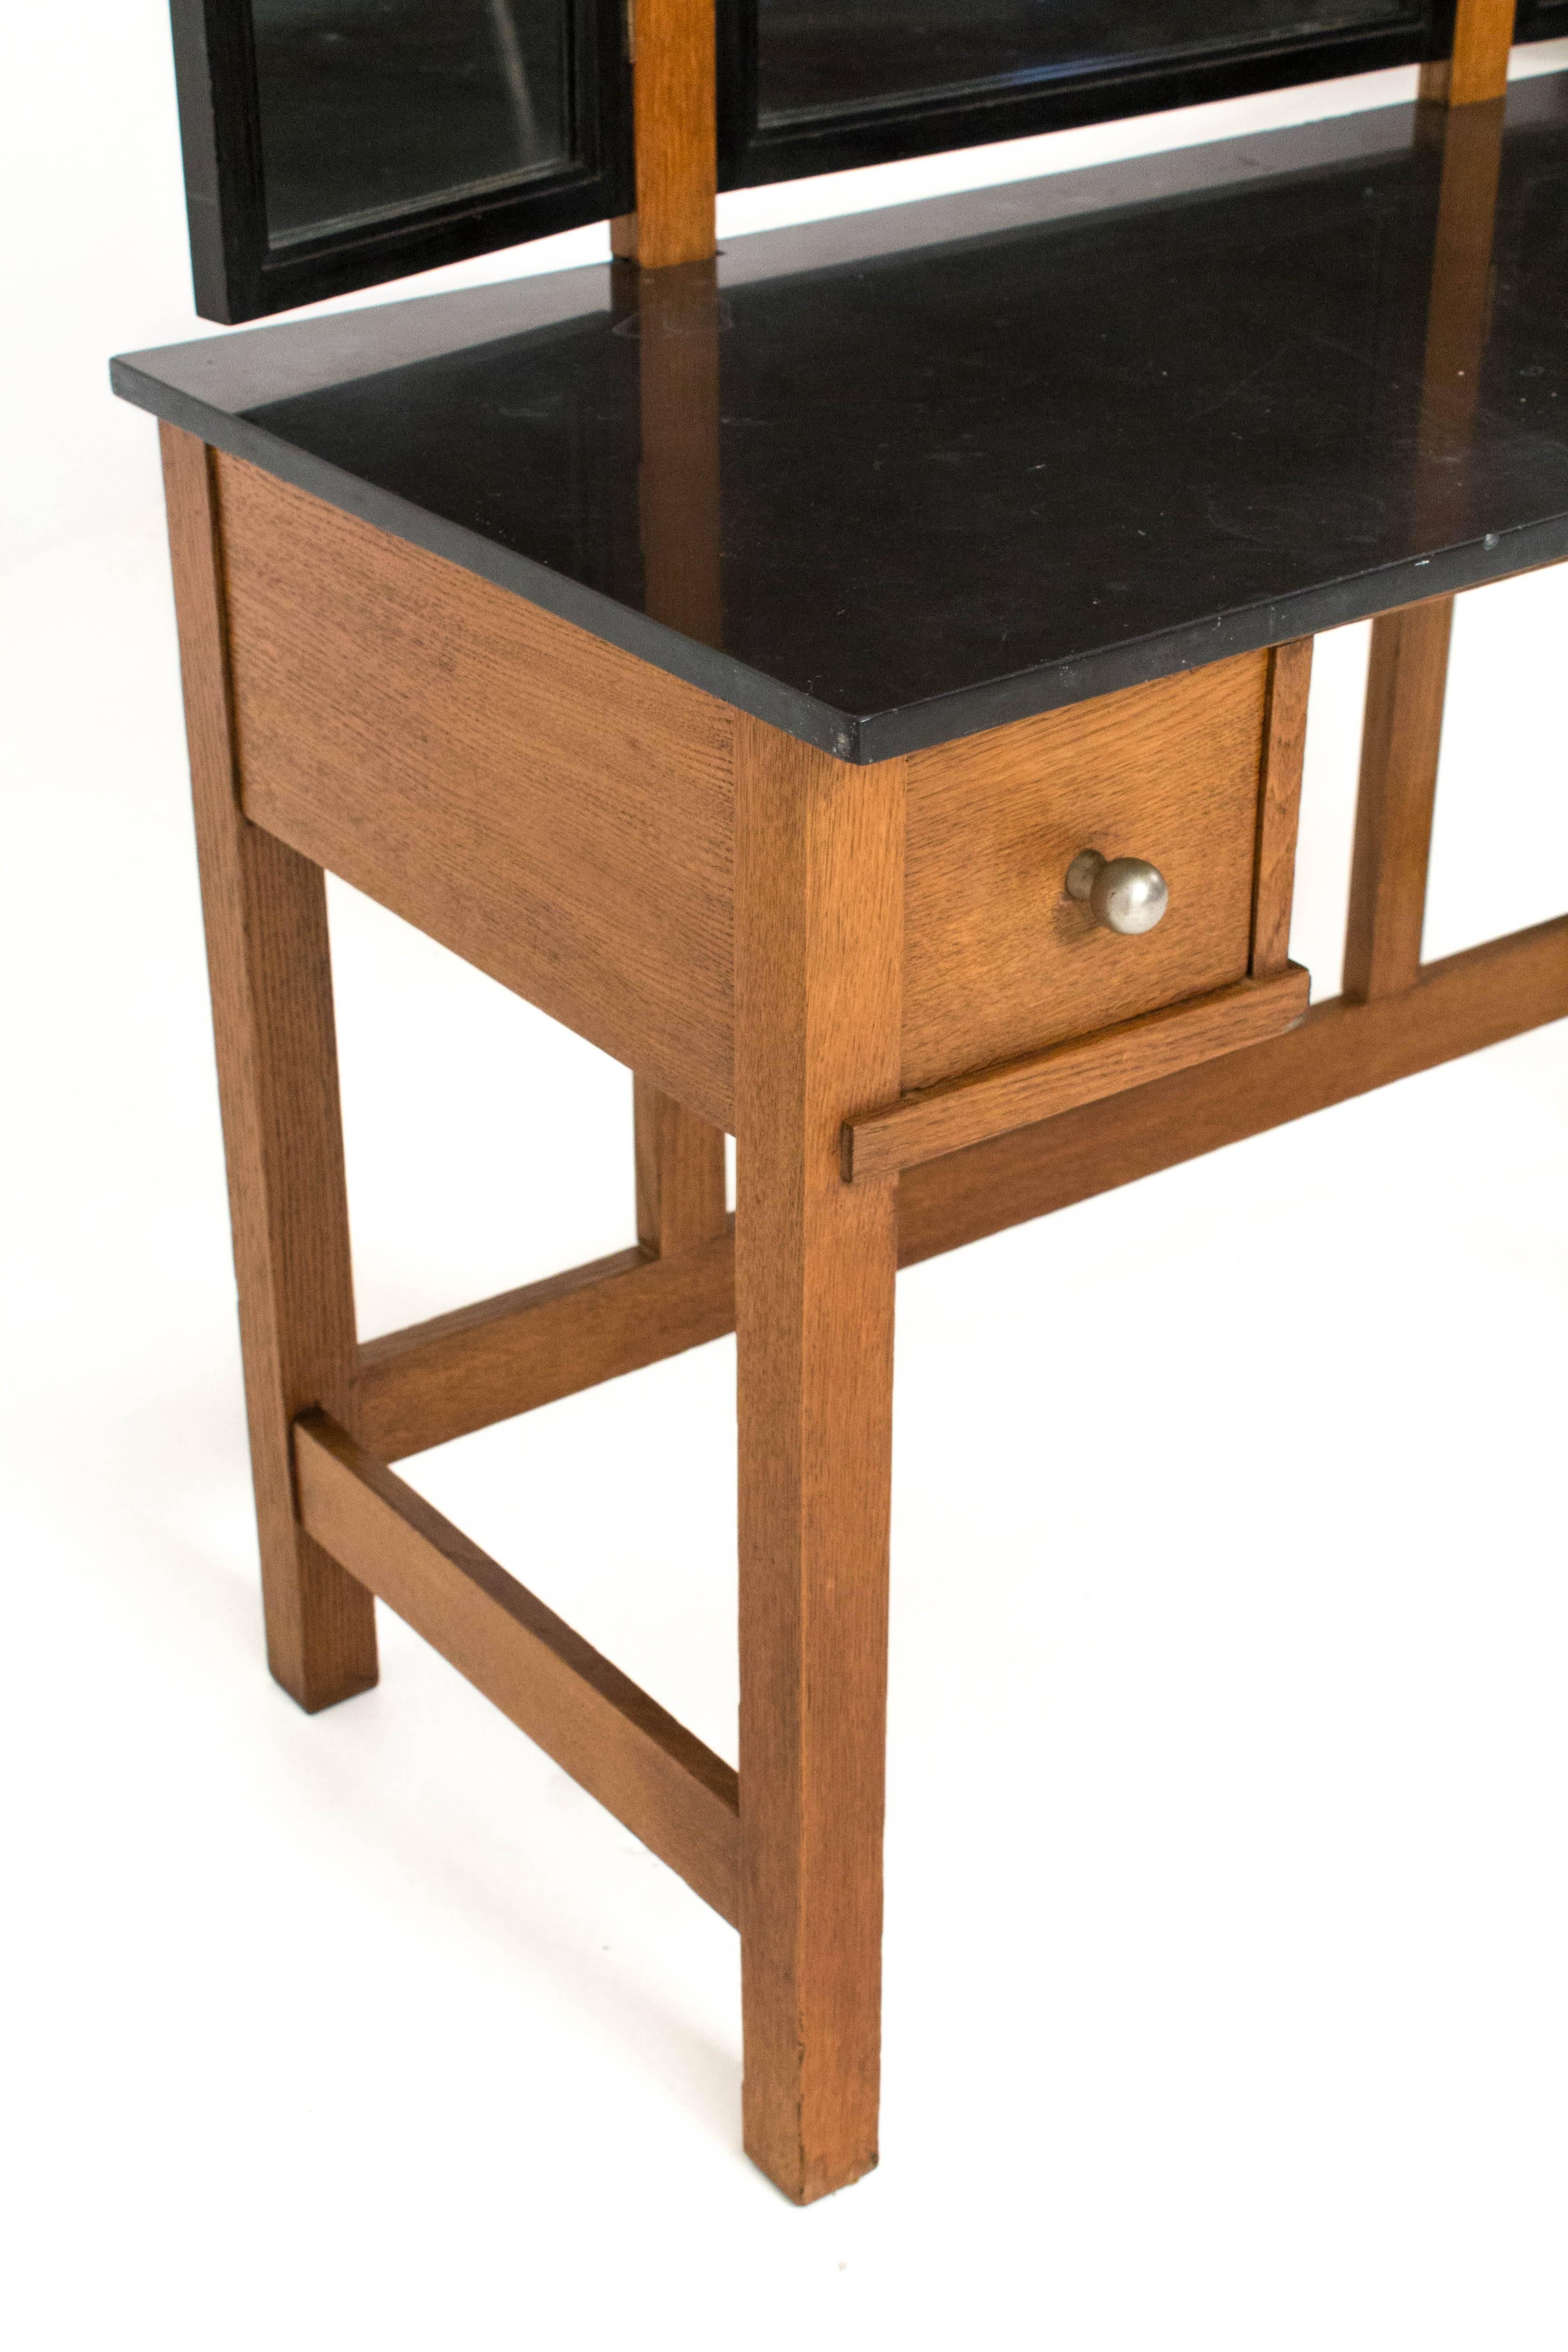 Rare Art Deco Haagse School dressing table or vanity by Henk Wouda for Pander.
Solid oak with ebonized details and original black granite top.
The two drawers have original nickel knobs.
Marked with metal tag Pander on the back of the mirror and